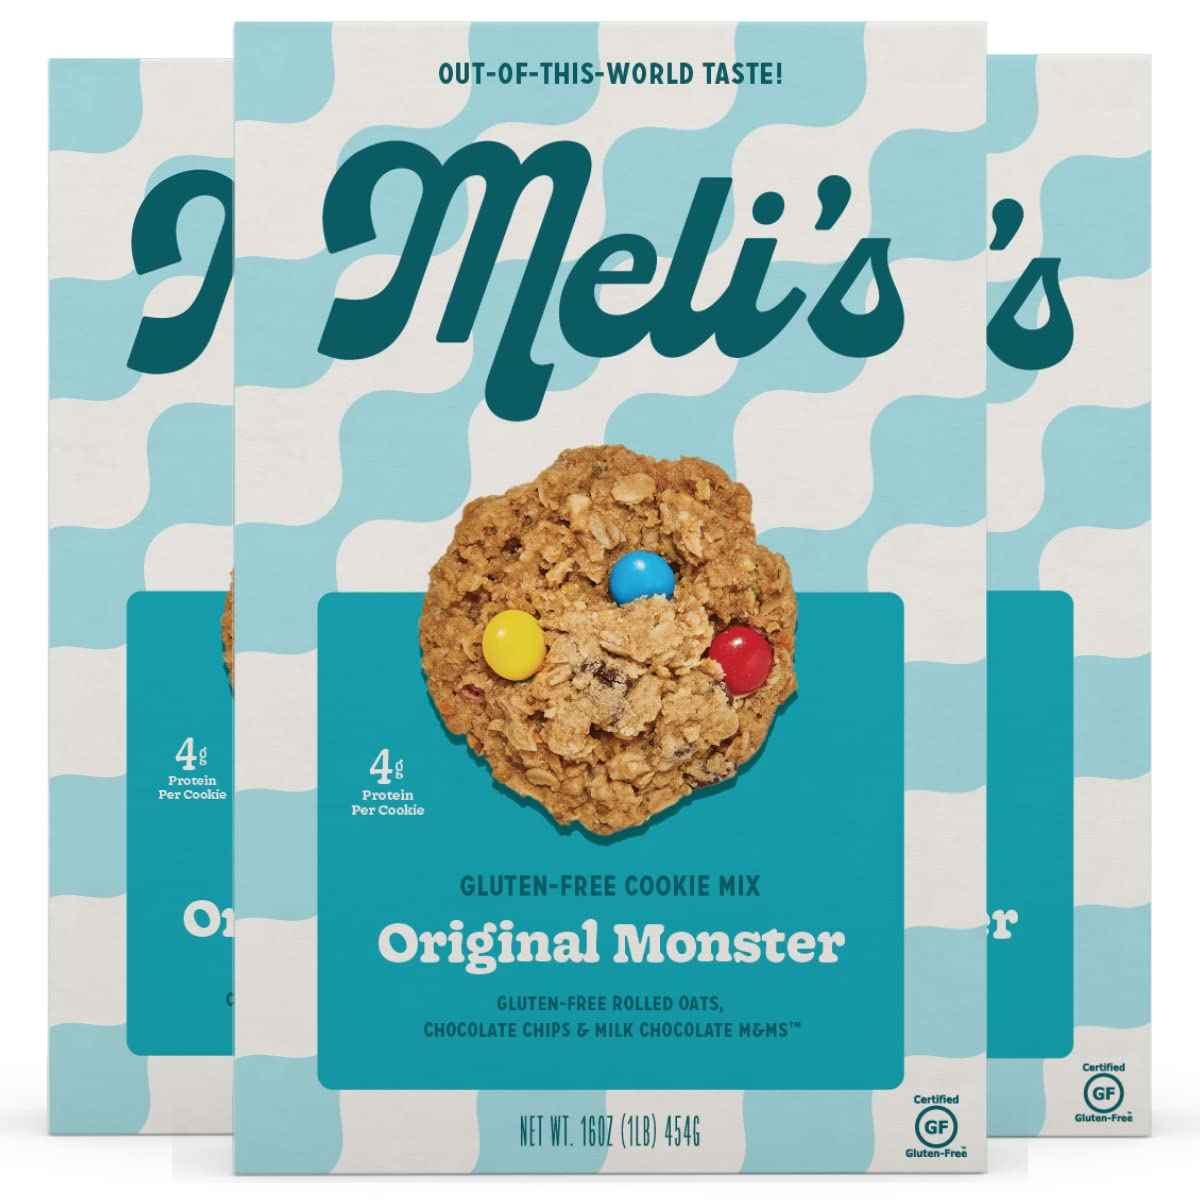 Meli’s Gluten-Free Cookie Mix, Original Monster, Made with Certified Gluten-Free Rolled Oats, Natural Chocolate Chips, and M&M's, 16 oz Boxes (Pack of 3)